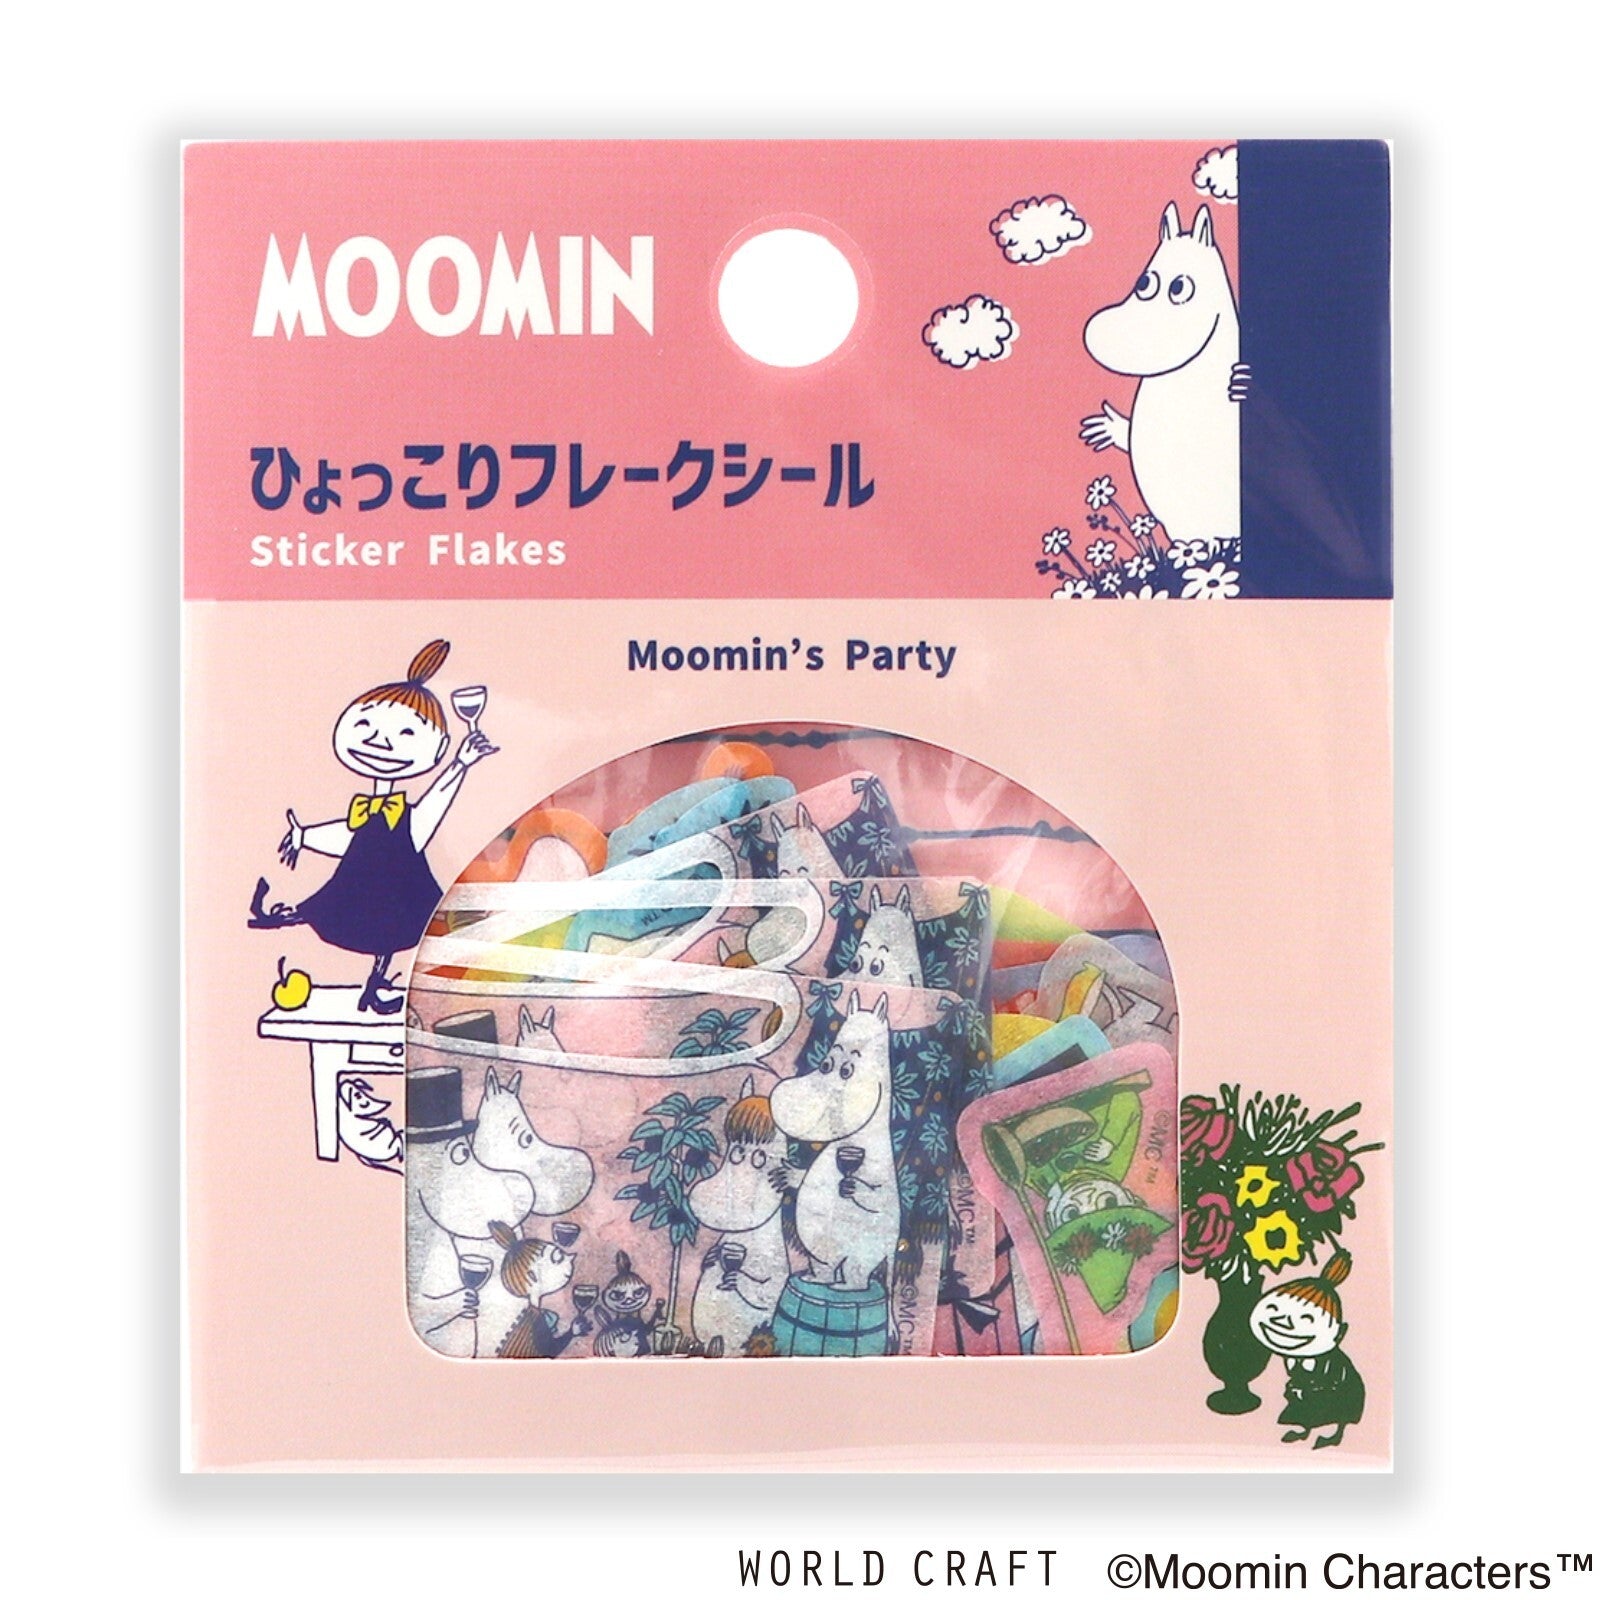 The Moomins Washi Deco Sticker Flakes Moomin's Party